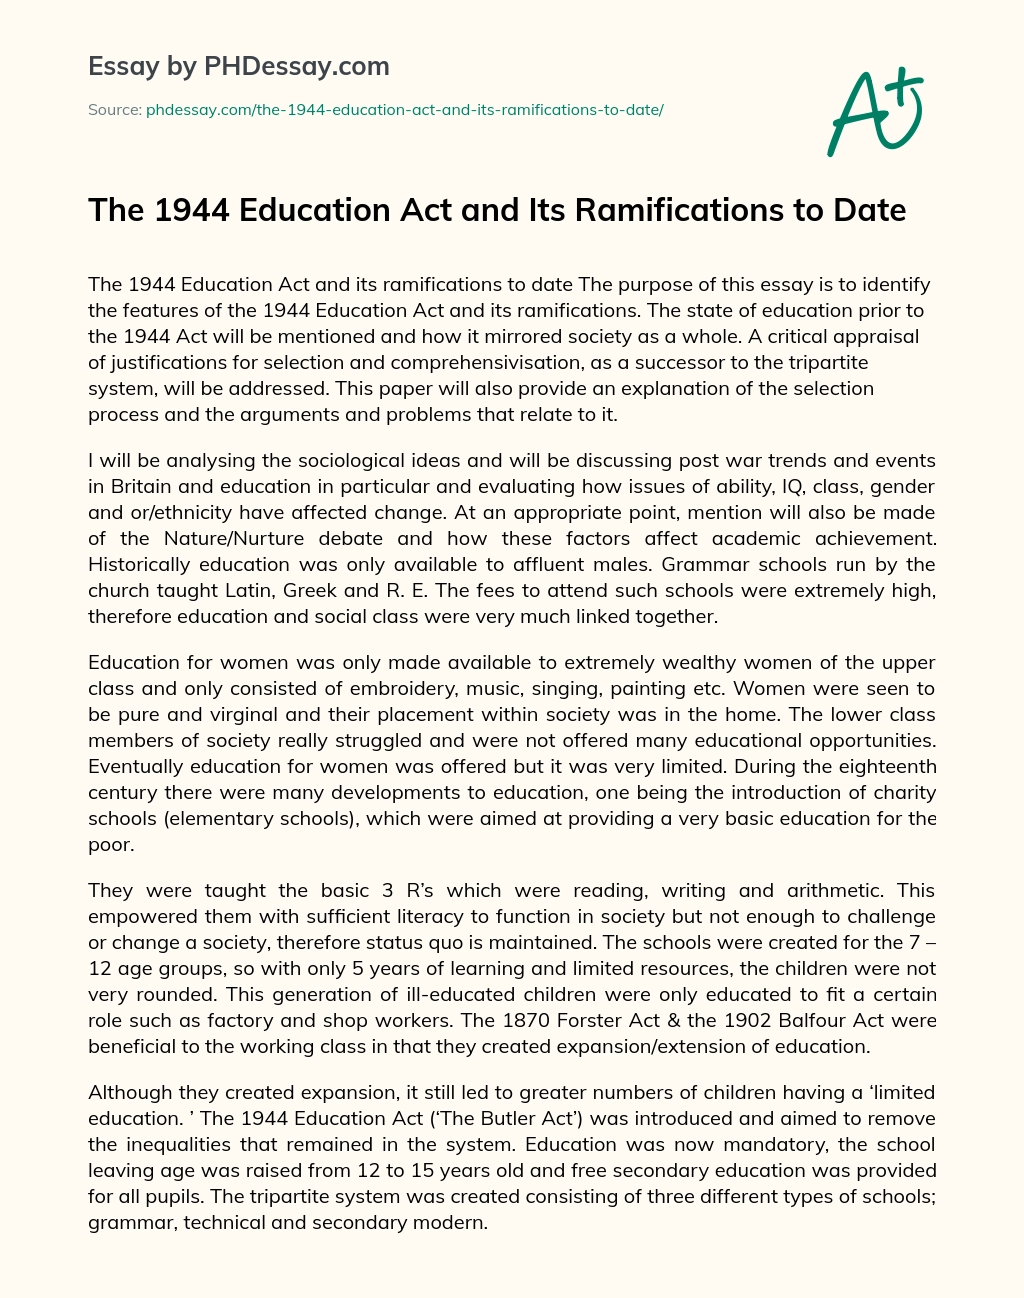 The 1944 Education Act and Its Ramifications to Date essay